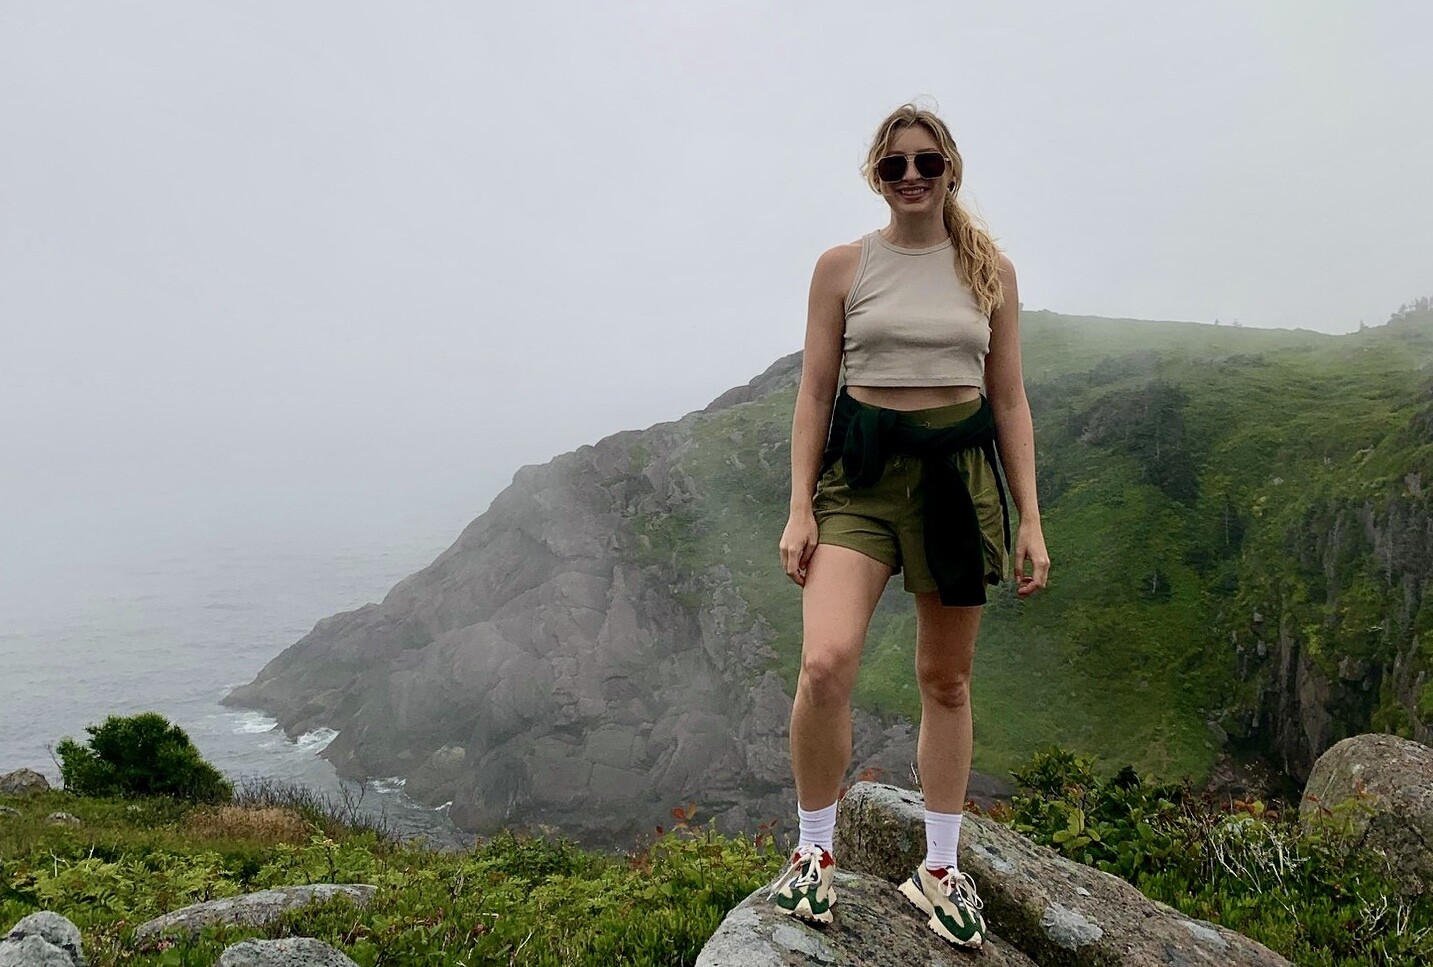 Scenic image of Dr. Sarah park on a hike